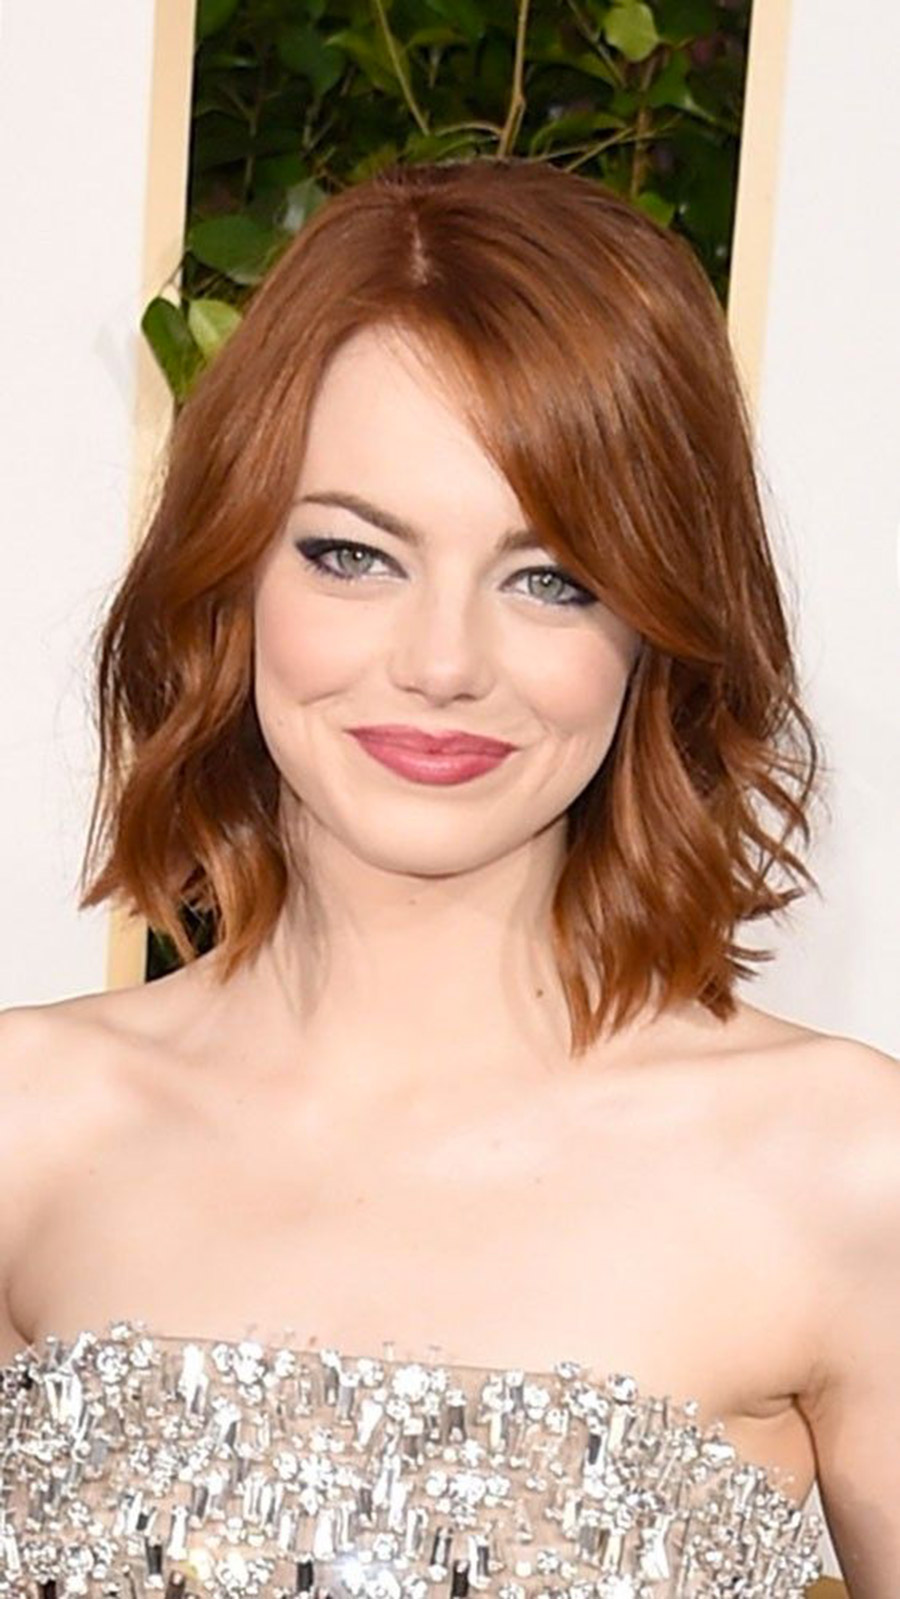 Emma-stone-the-best-famous-picture-actress--source-vogue-tunisie-hair-color-makeup